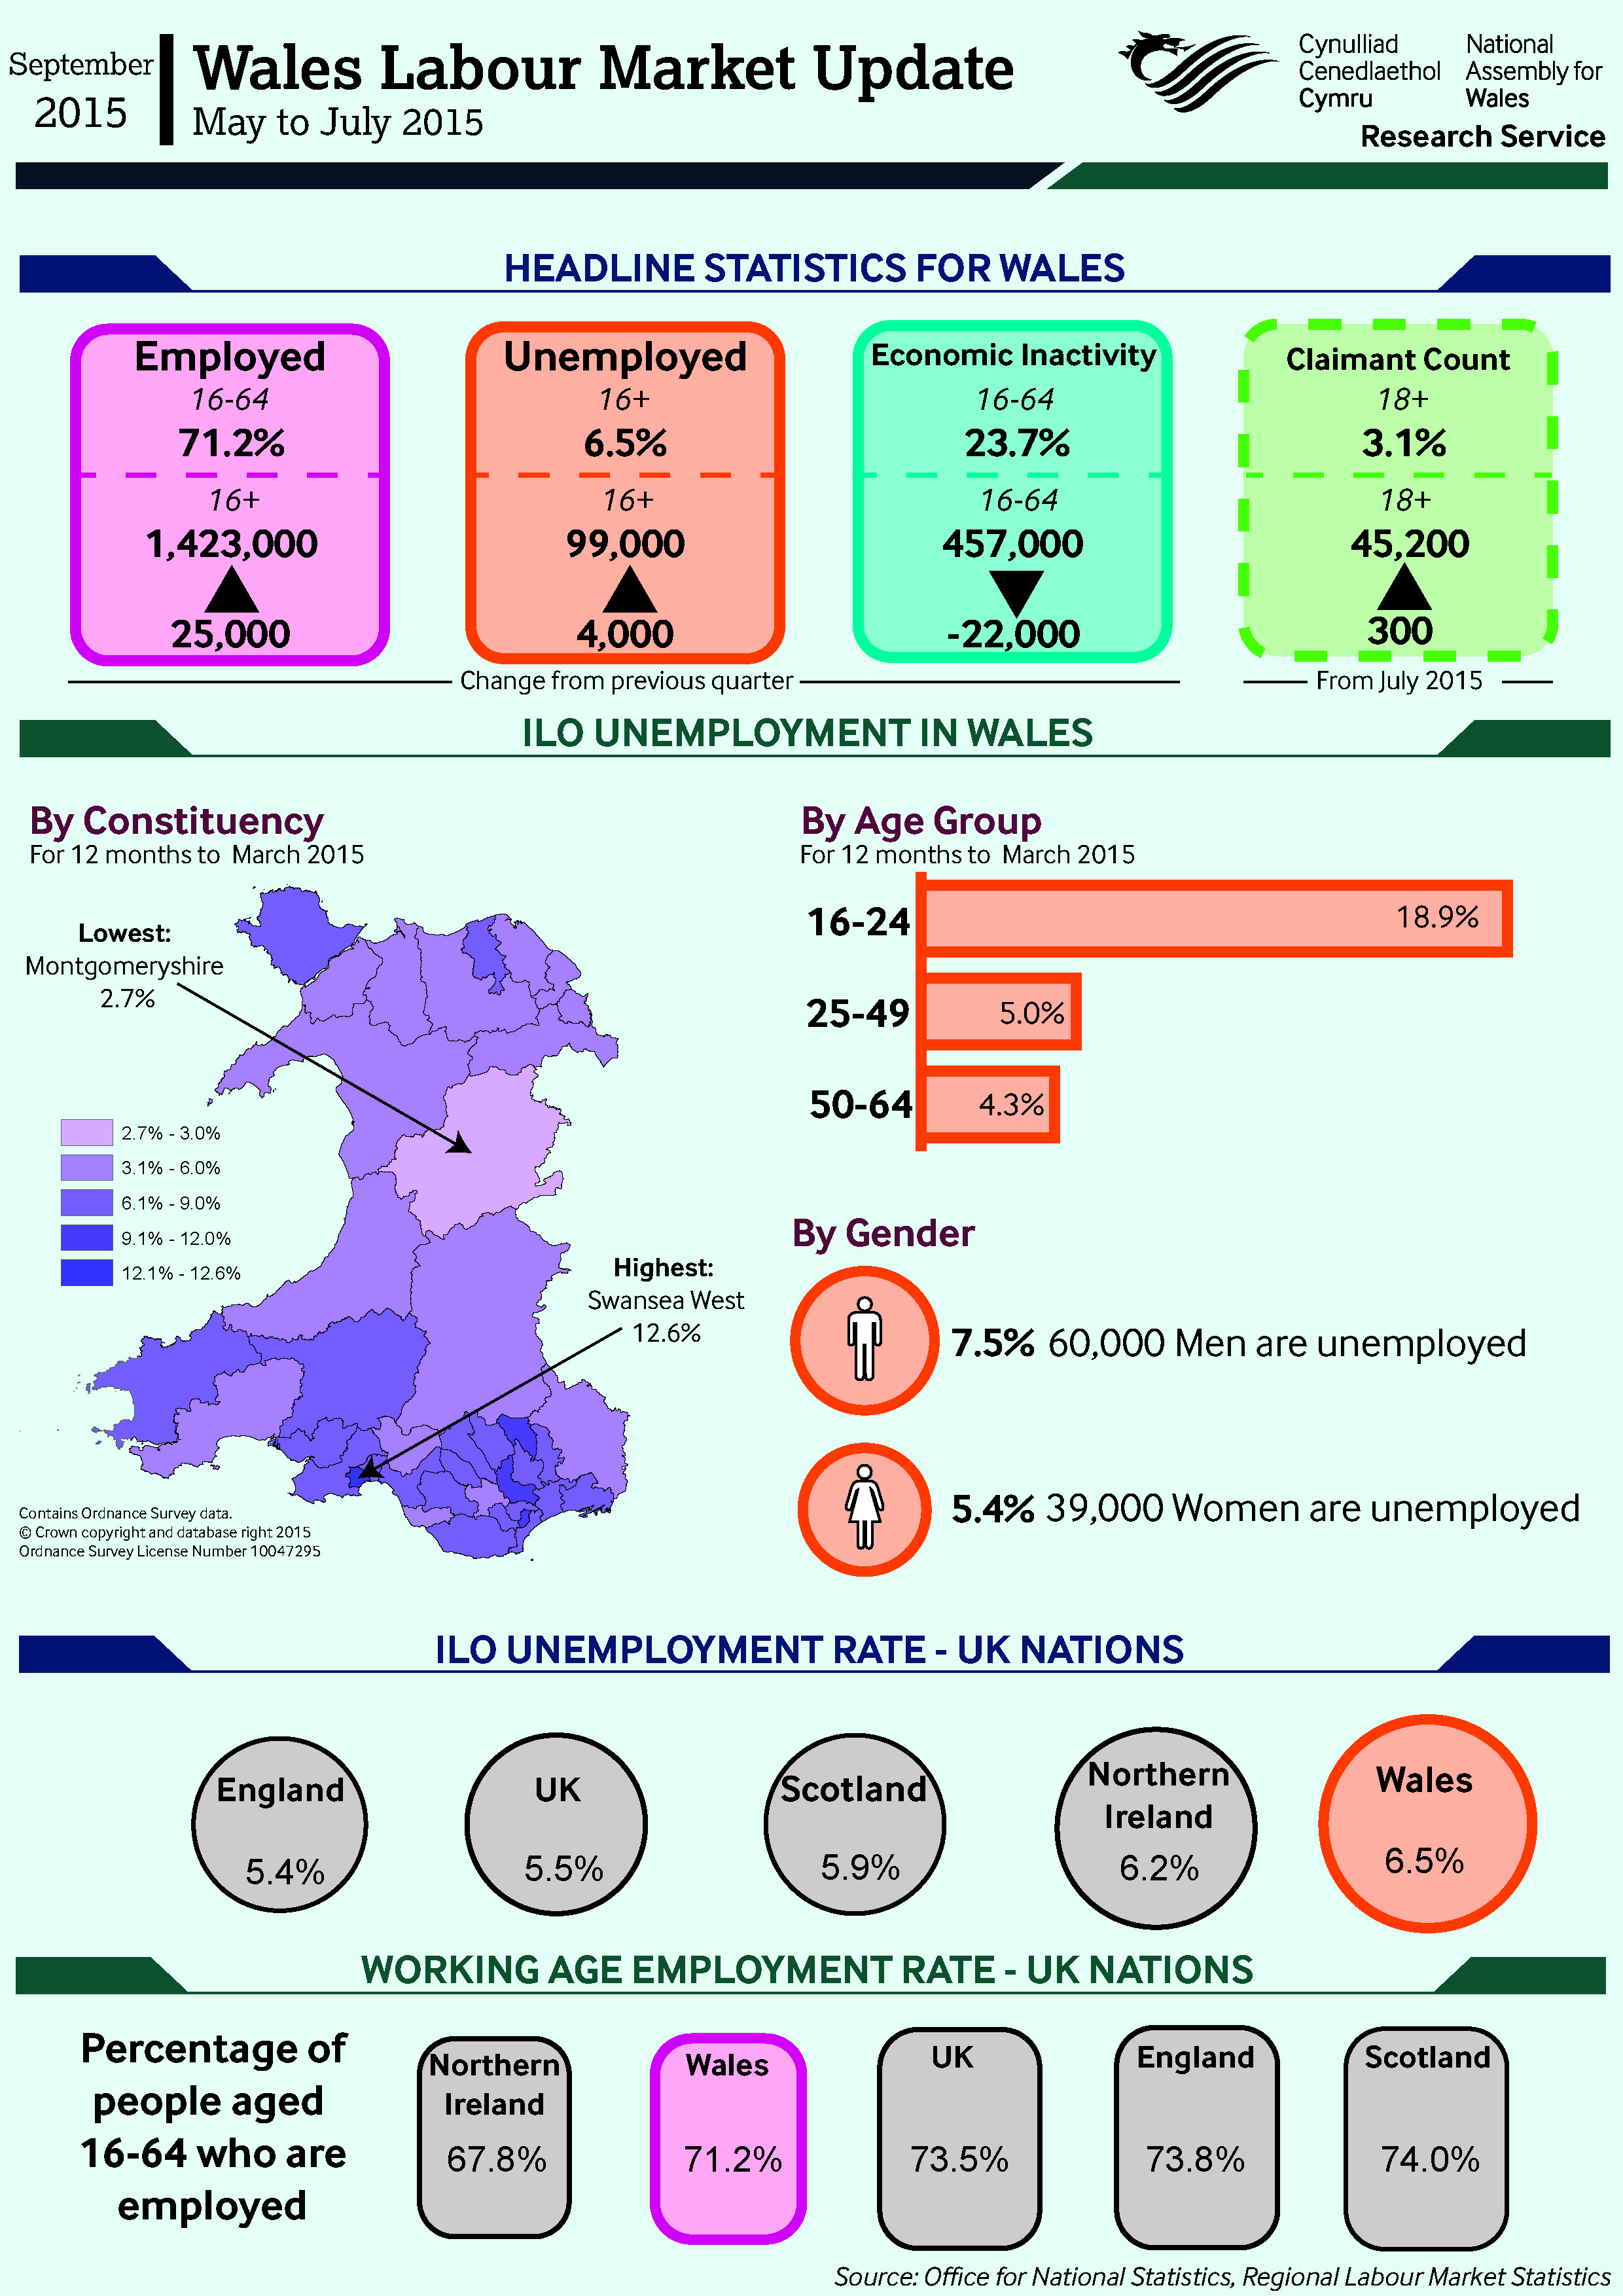 Infographic showing the latest labour market figures for Wales.